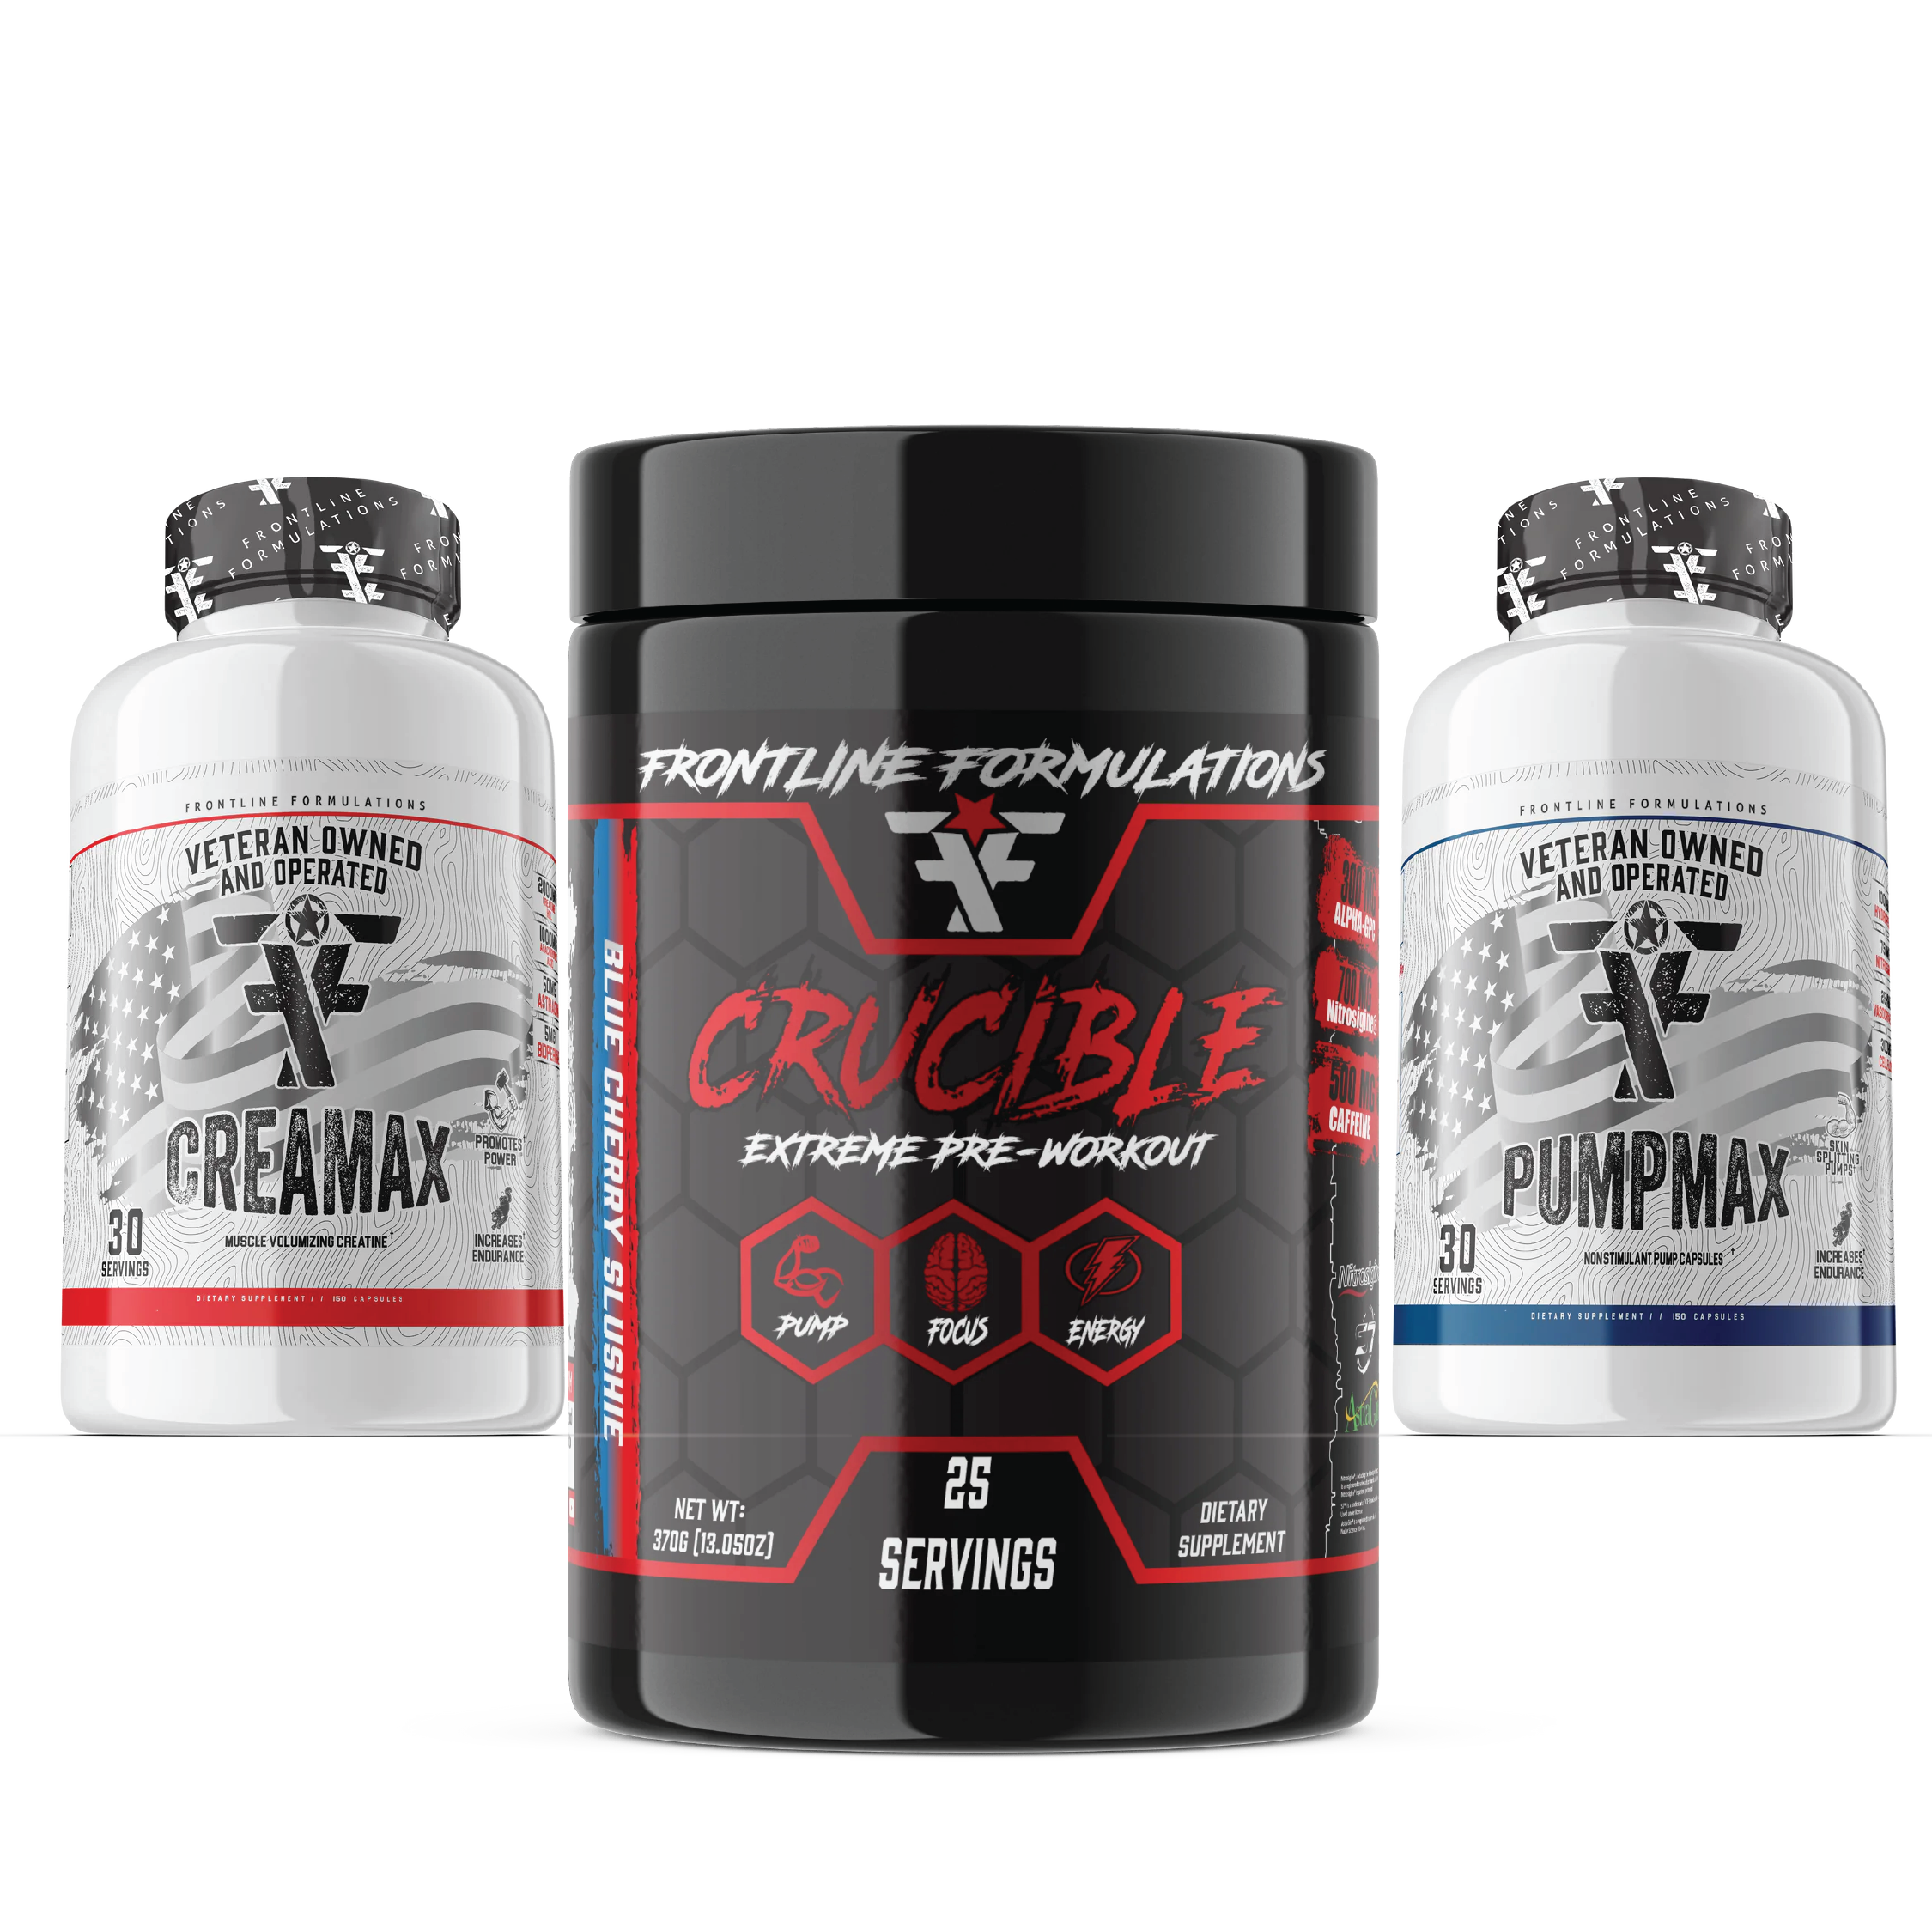 Crucible Pumpmax Creamax Stack Crucible Crucible is quickly becoming the HOTTEST pre-workout on the market because of its clinically dosed ingredients and perfected formula. Insane energy from 500mg of potent time-released, tri-blend caffeine Enhances nit